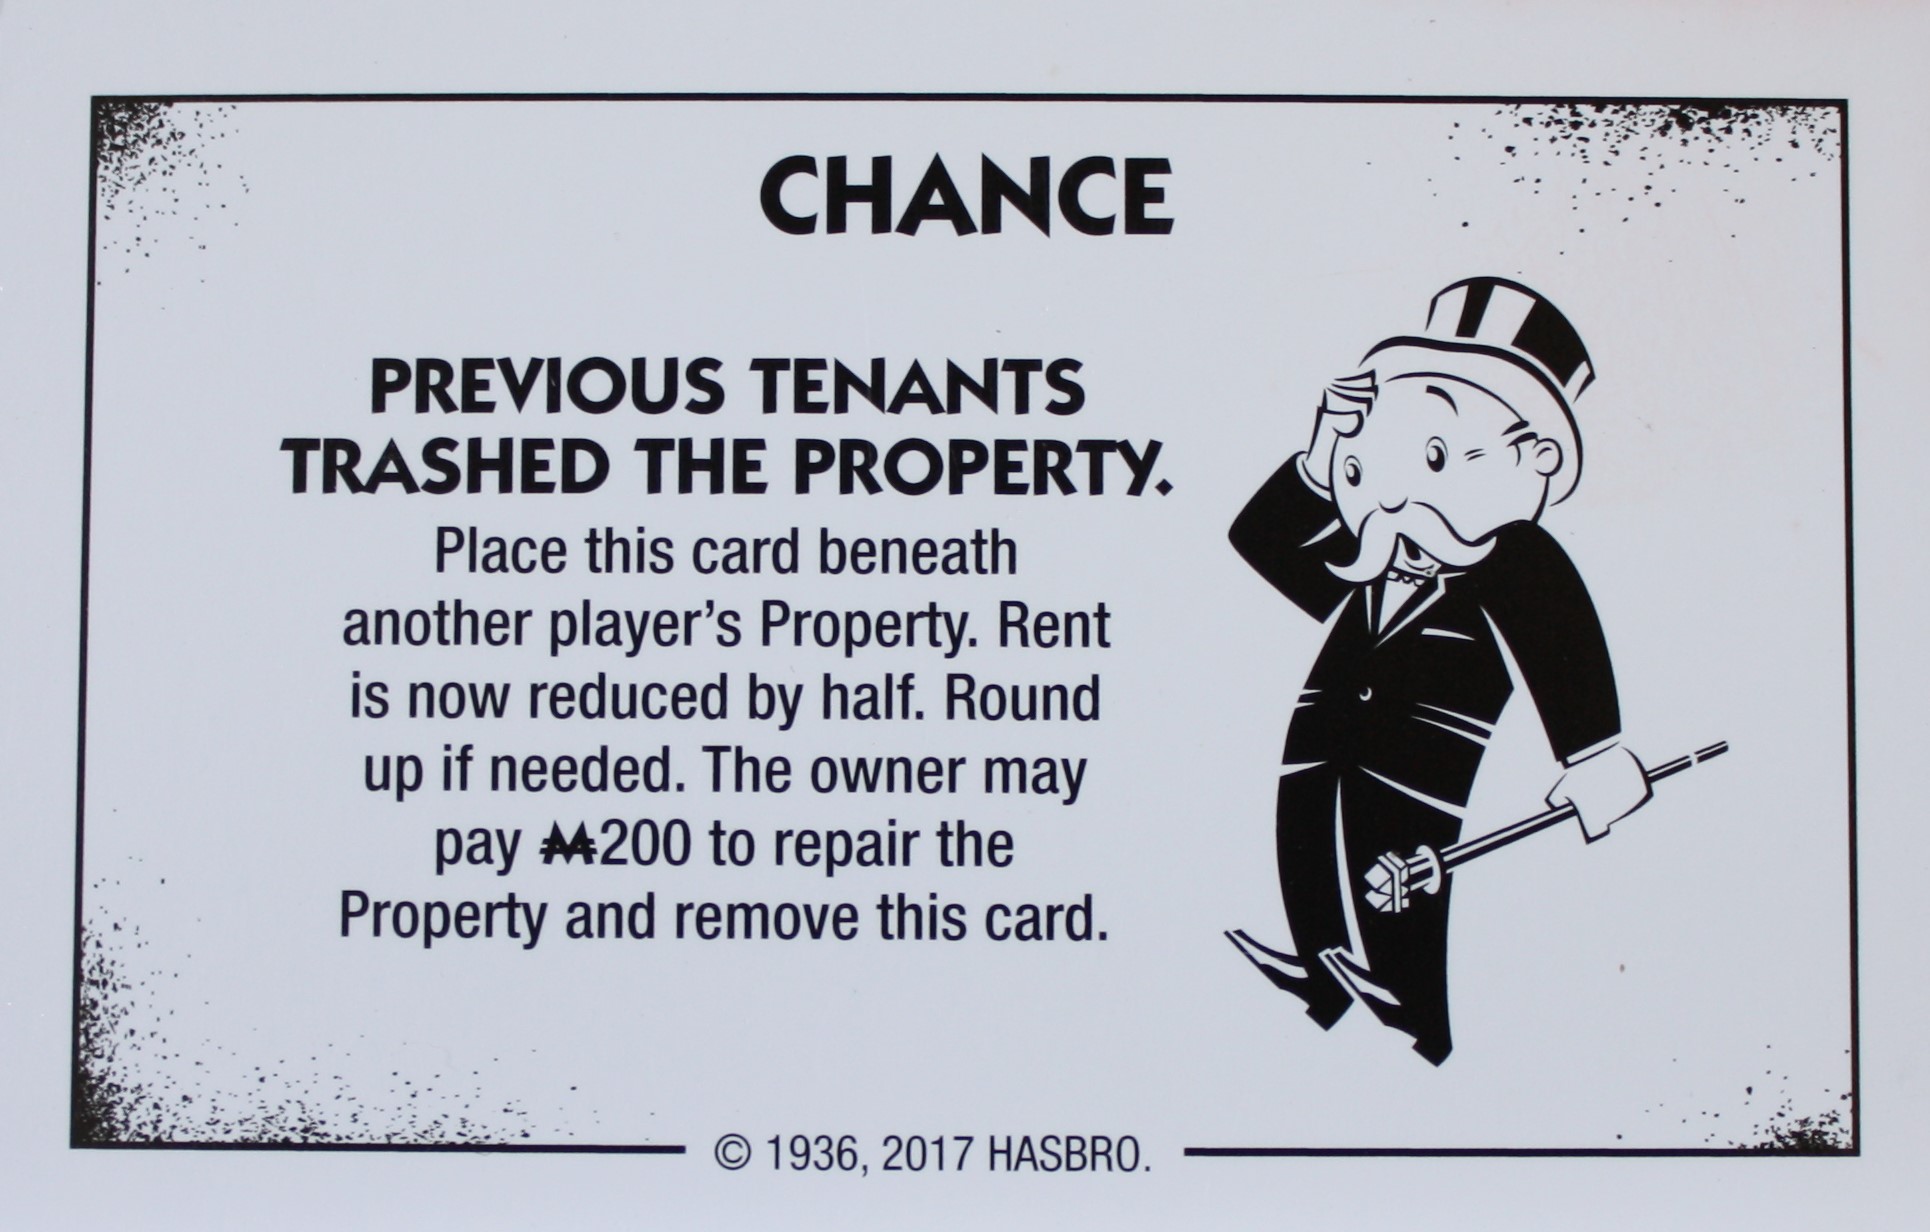 monopoly cheaters edition rules